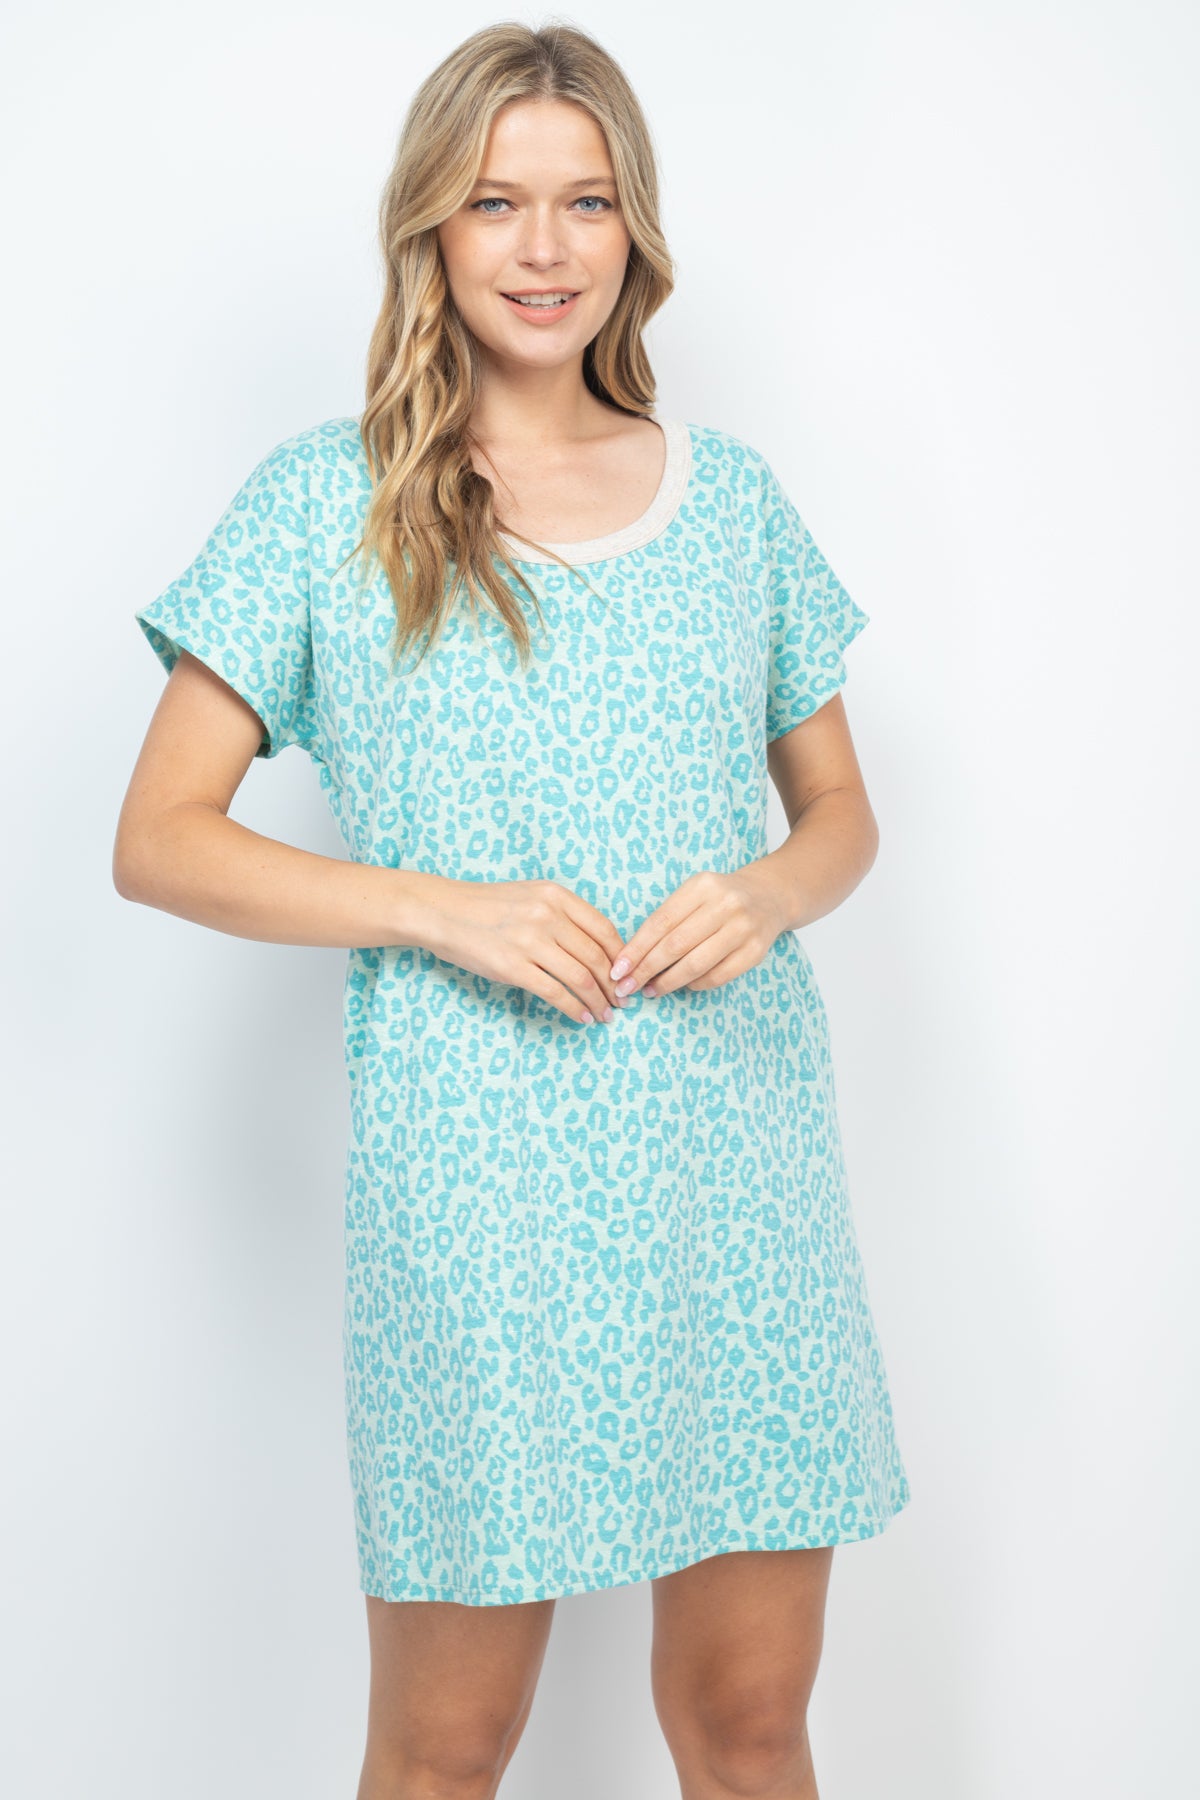 PPD1222 - RIB ROUND NECK LEOPARD POCKET DRESS 1-2-2-2 (NOW $4.00 ONLY!)